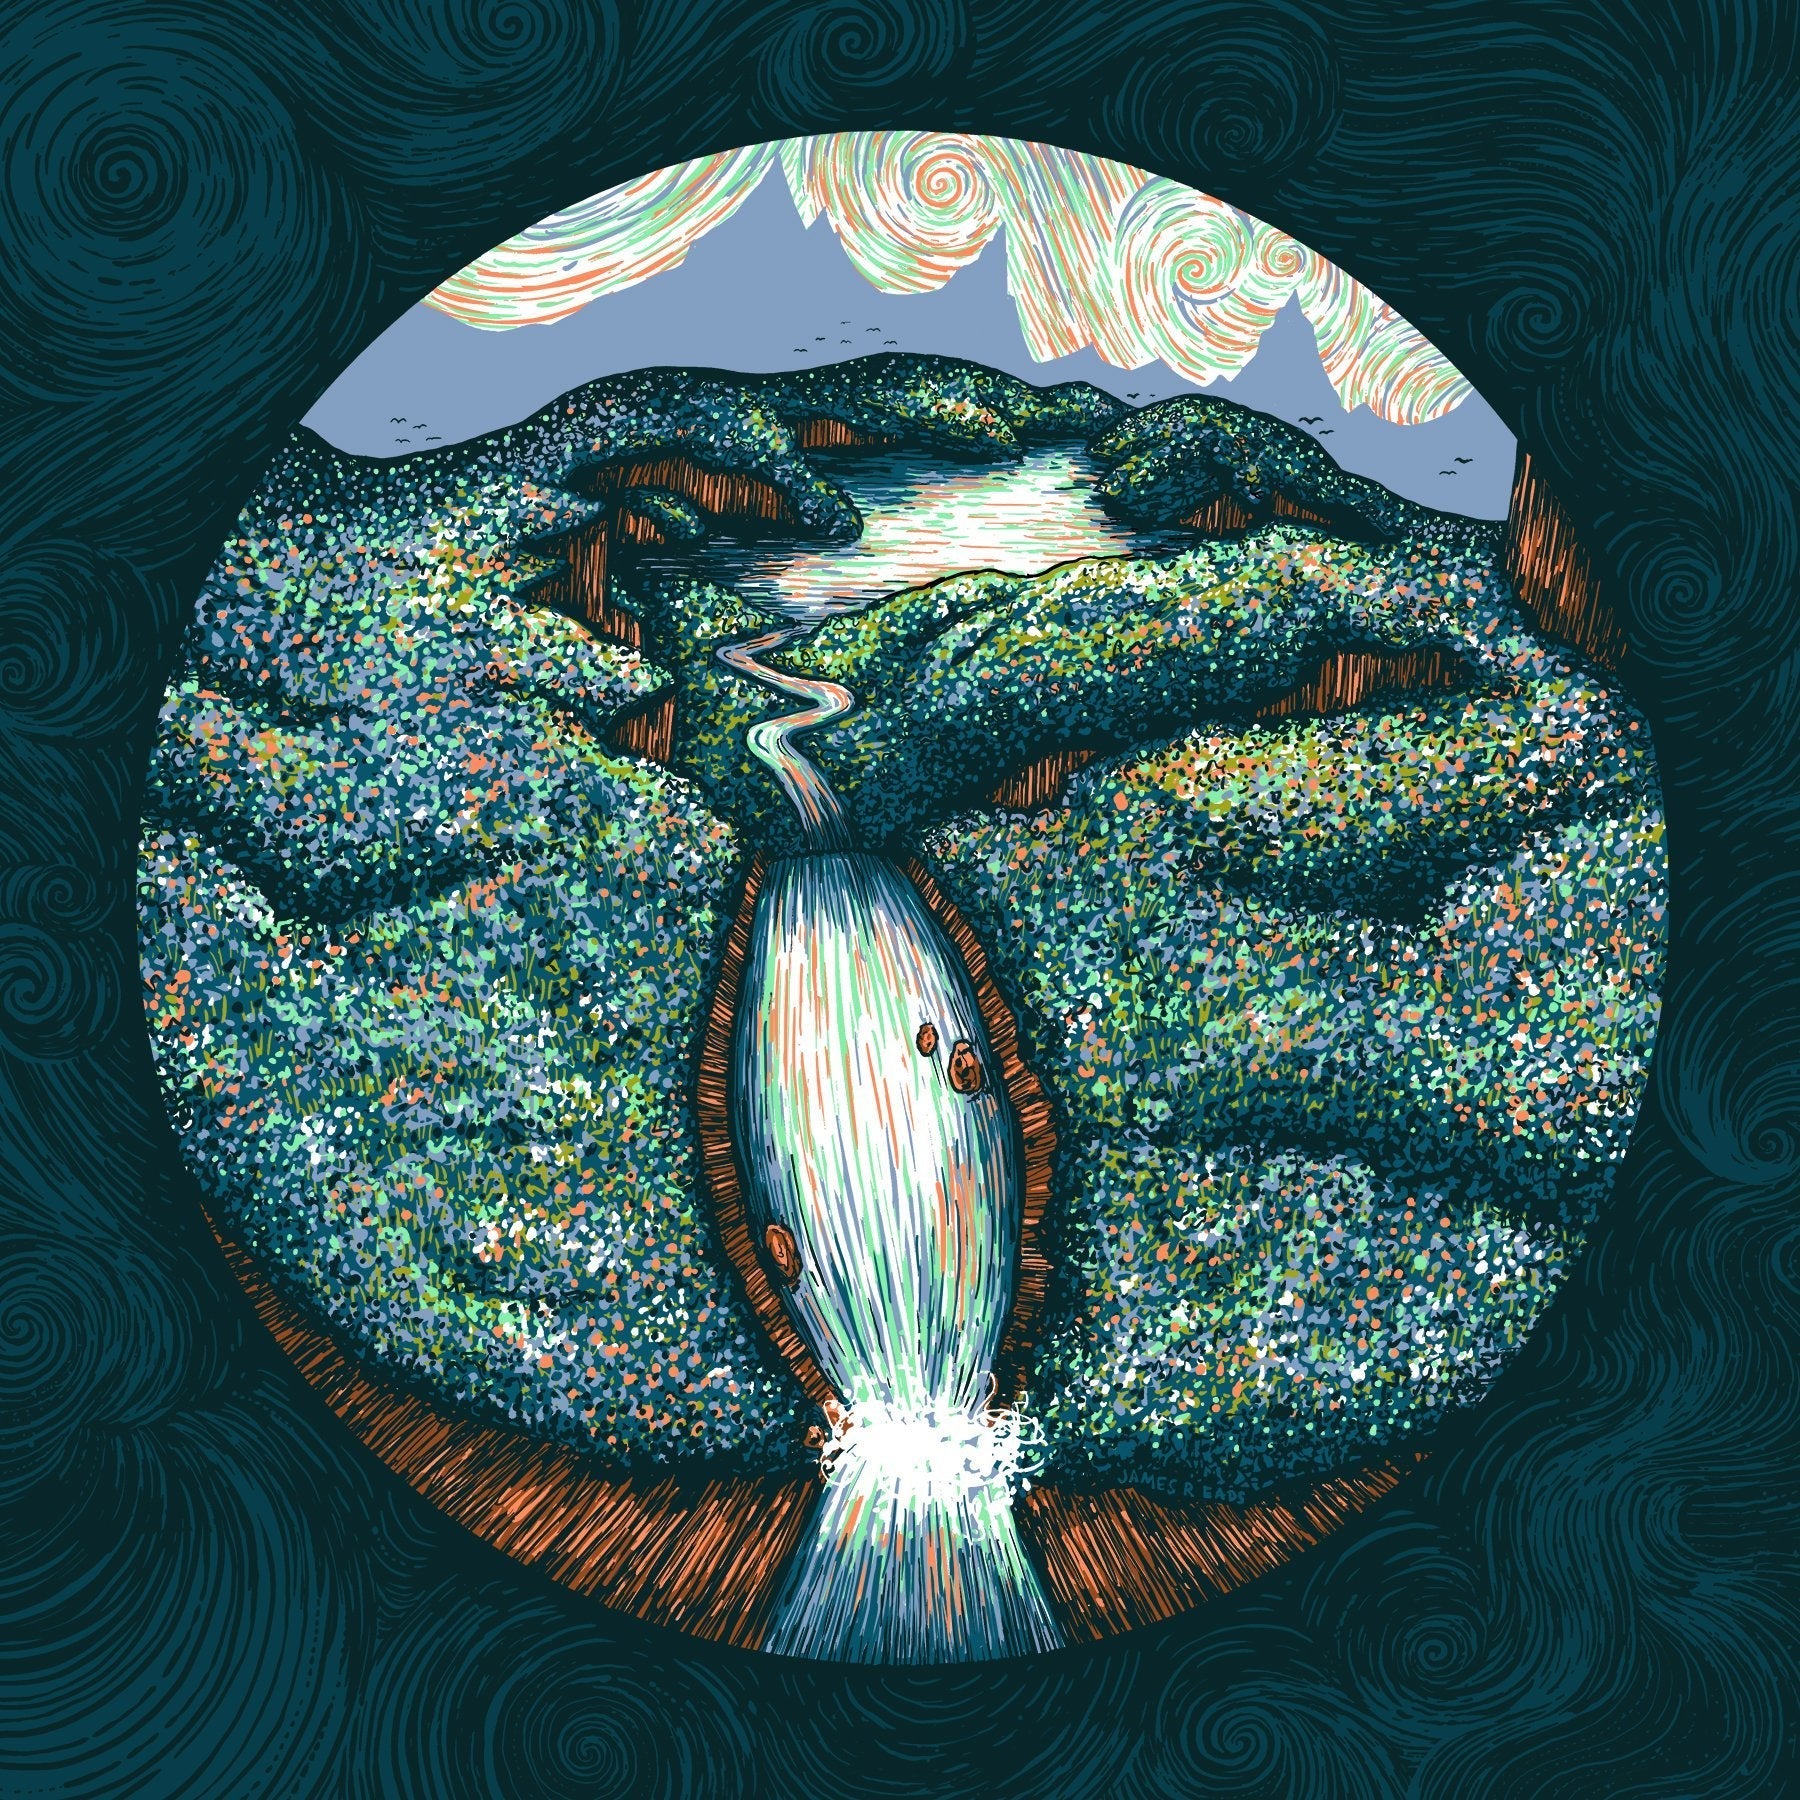 Dream Tracks EP (Available at Posters 4 People) James R. Eads